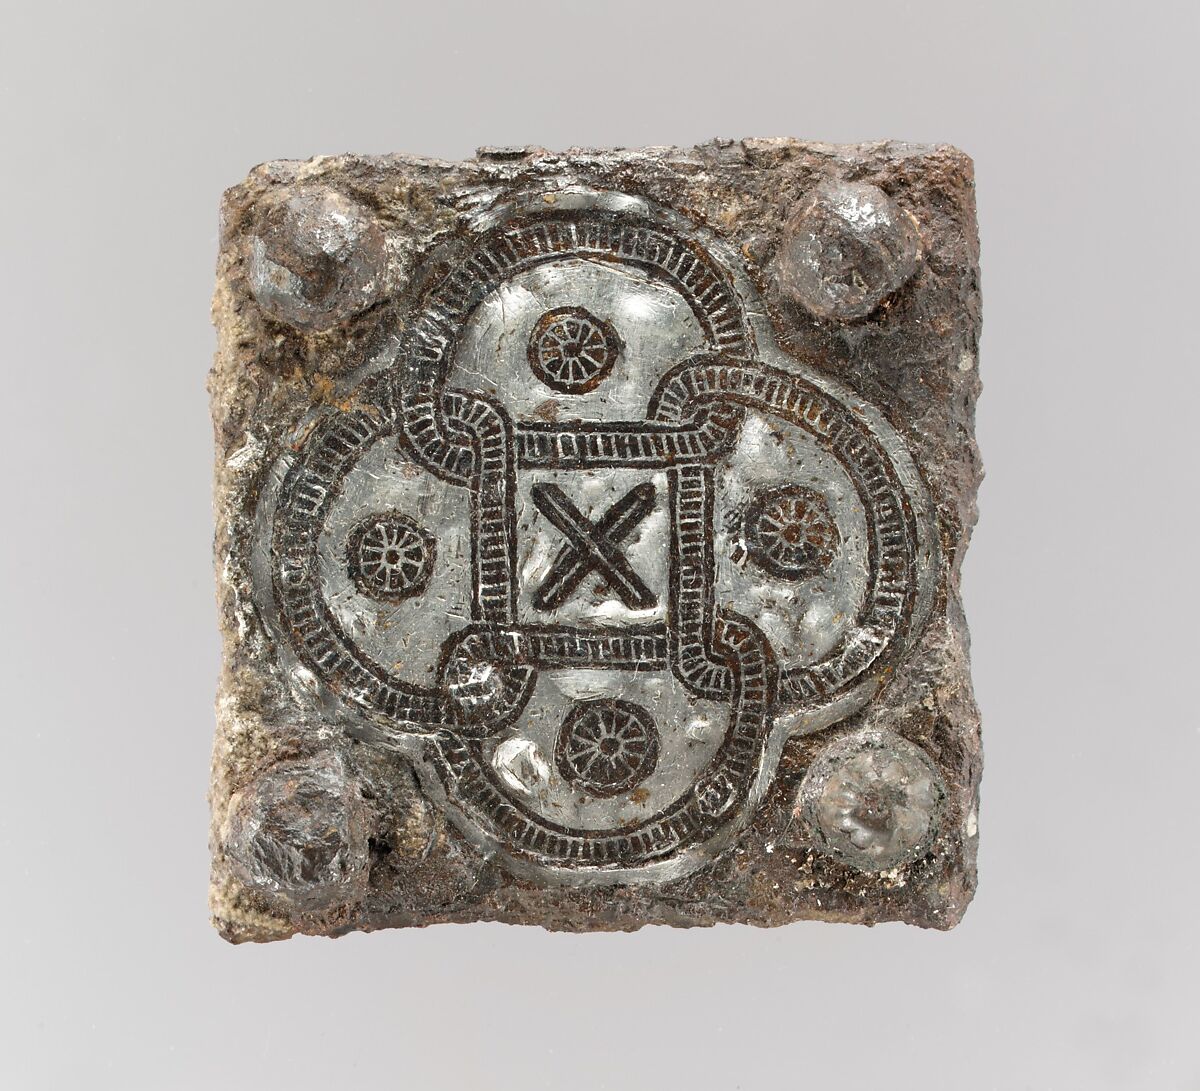 Back Plate from a Belt Buckle, Iron with silver inlay; one rivet a copper alloy (restoration?) …, Frankish 